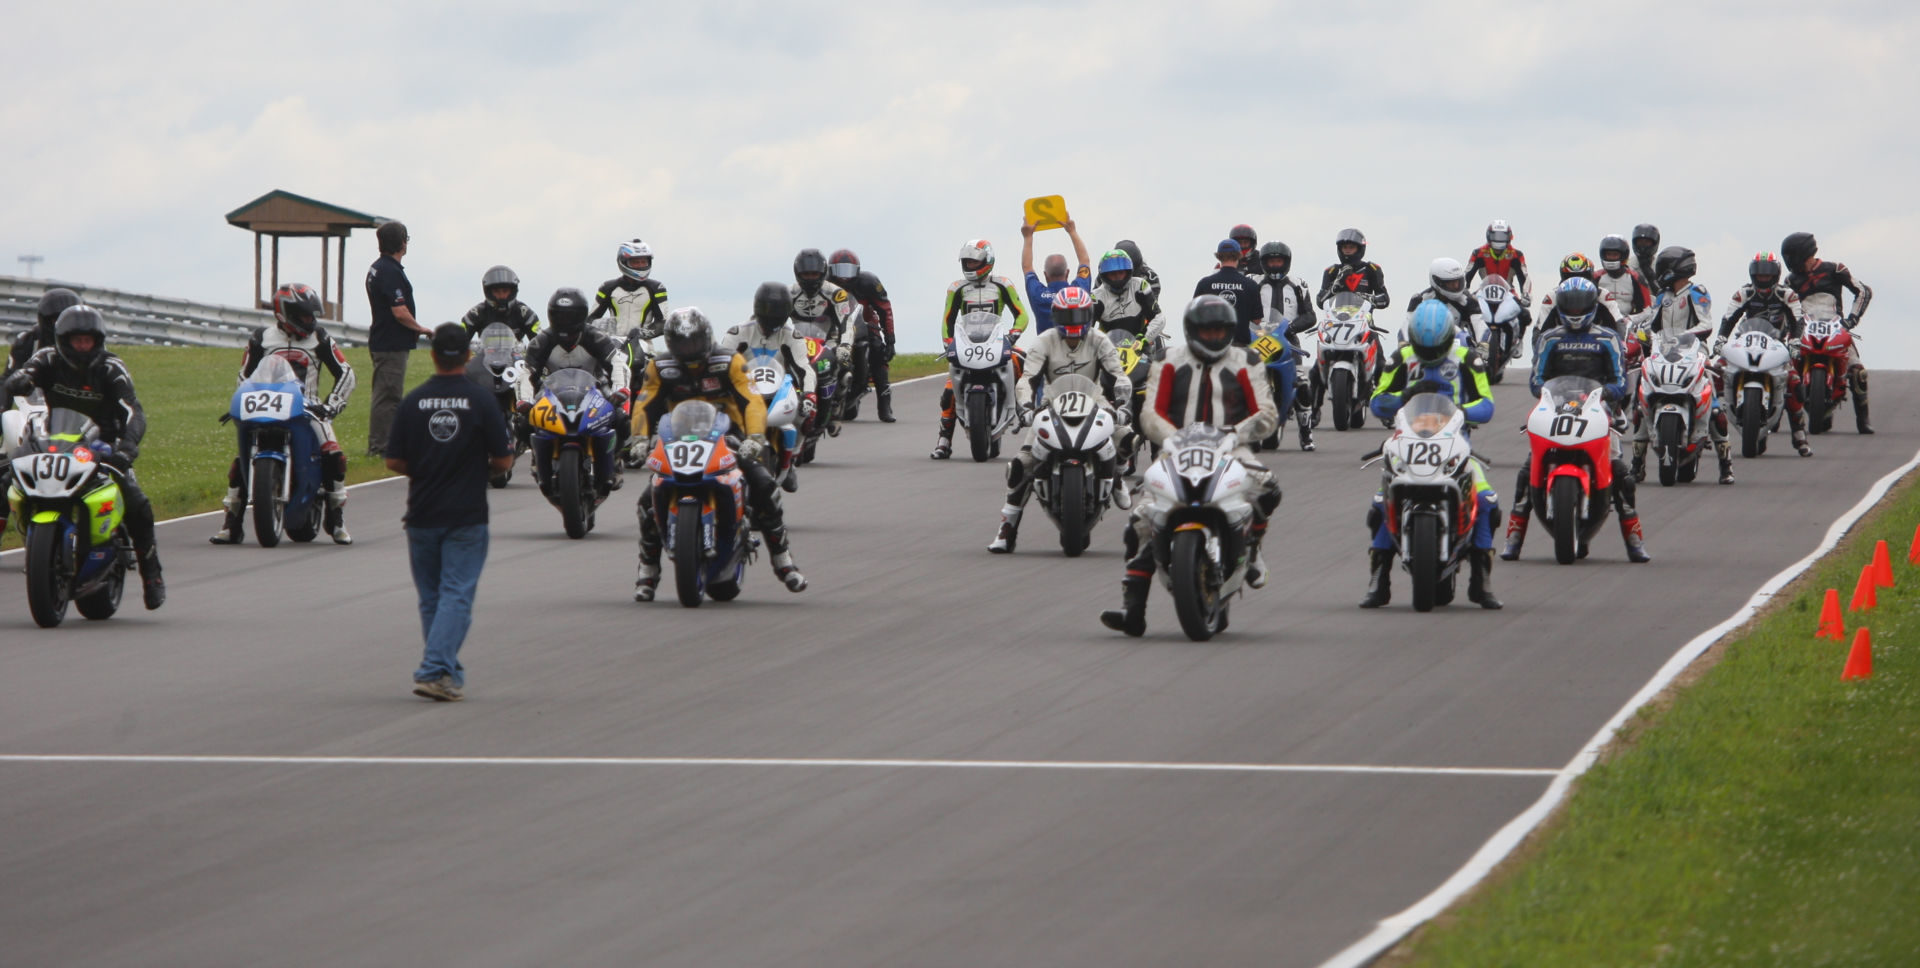 The grid prior to the start of a N2 Racing/WERA National Endurance race at Pittsburgh International Race Complex. Photo courtesy N2 Racing.